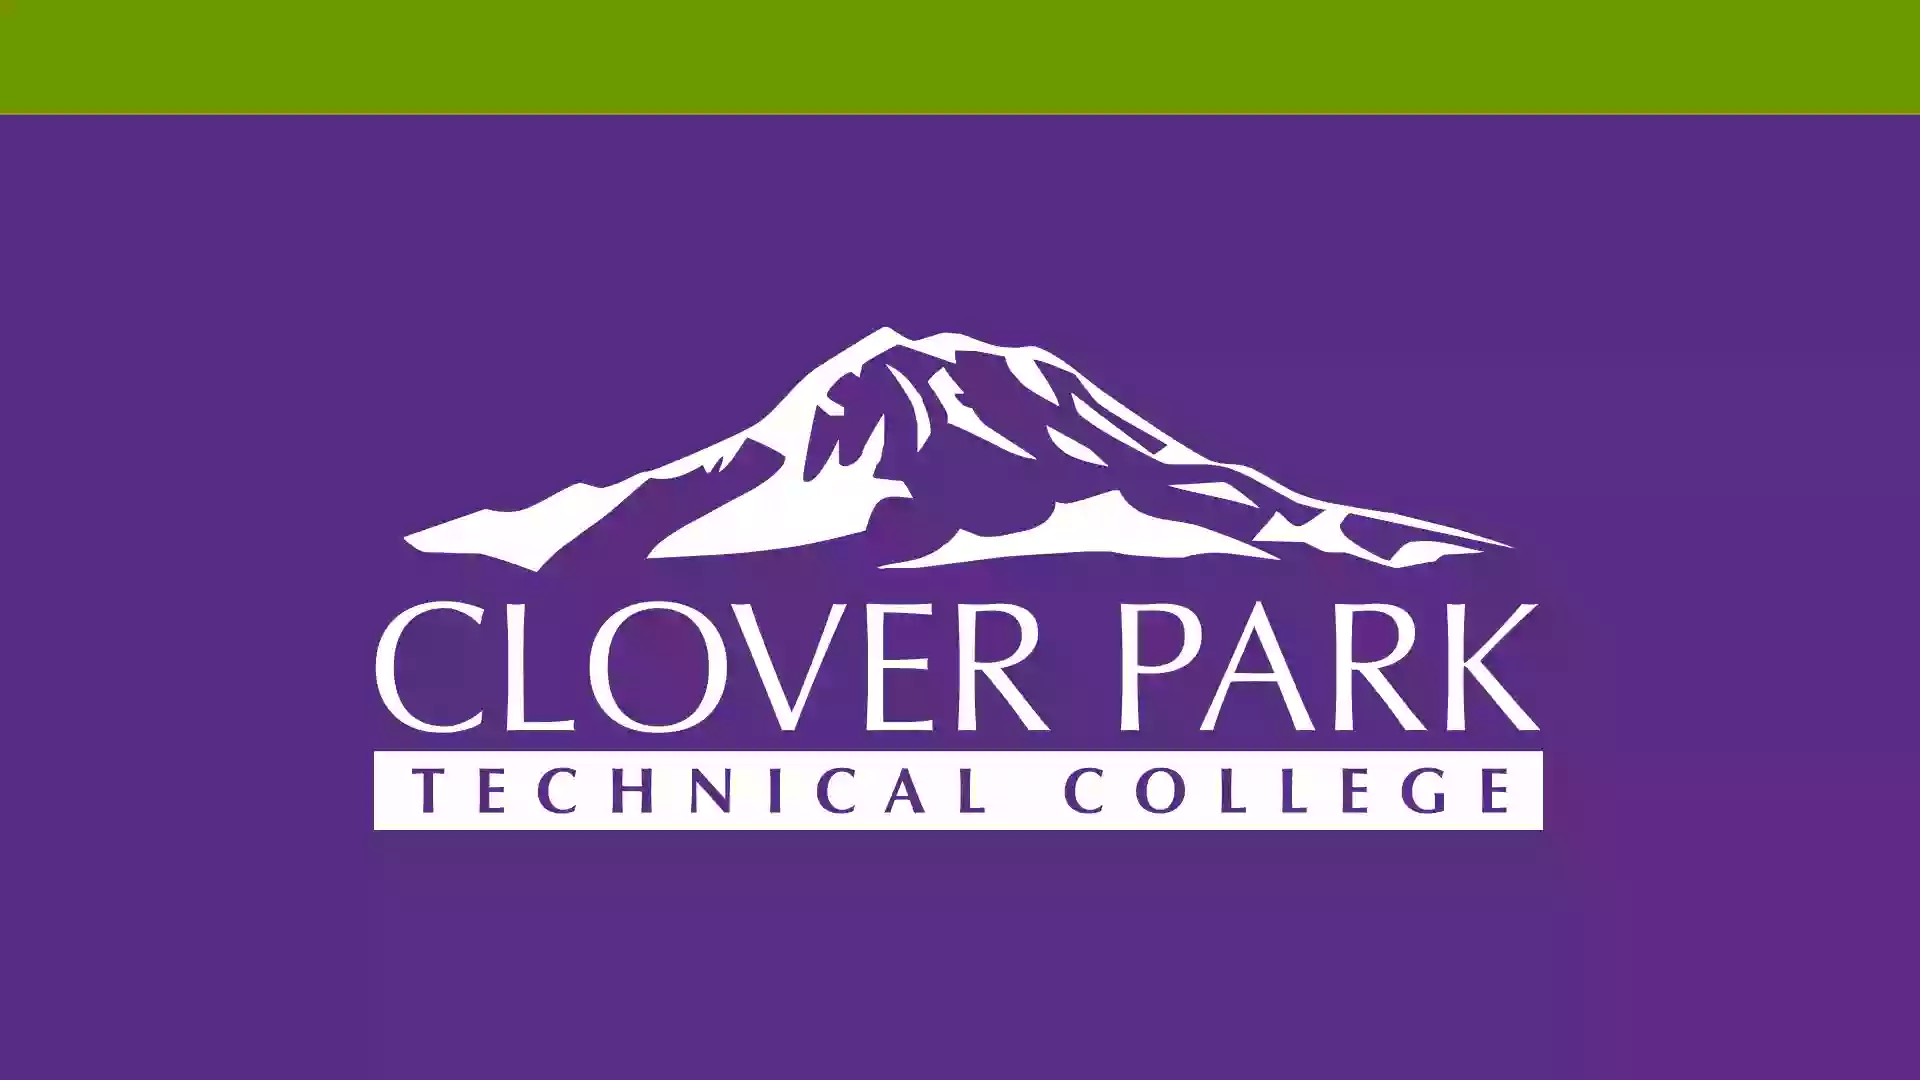 Clover Park Technical College | Building 24 | Nondestructive Testing (NDT)